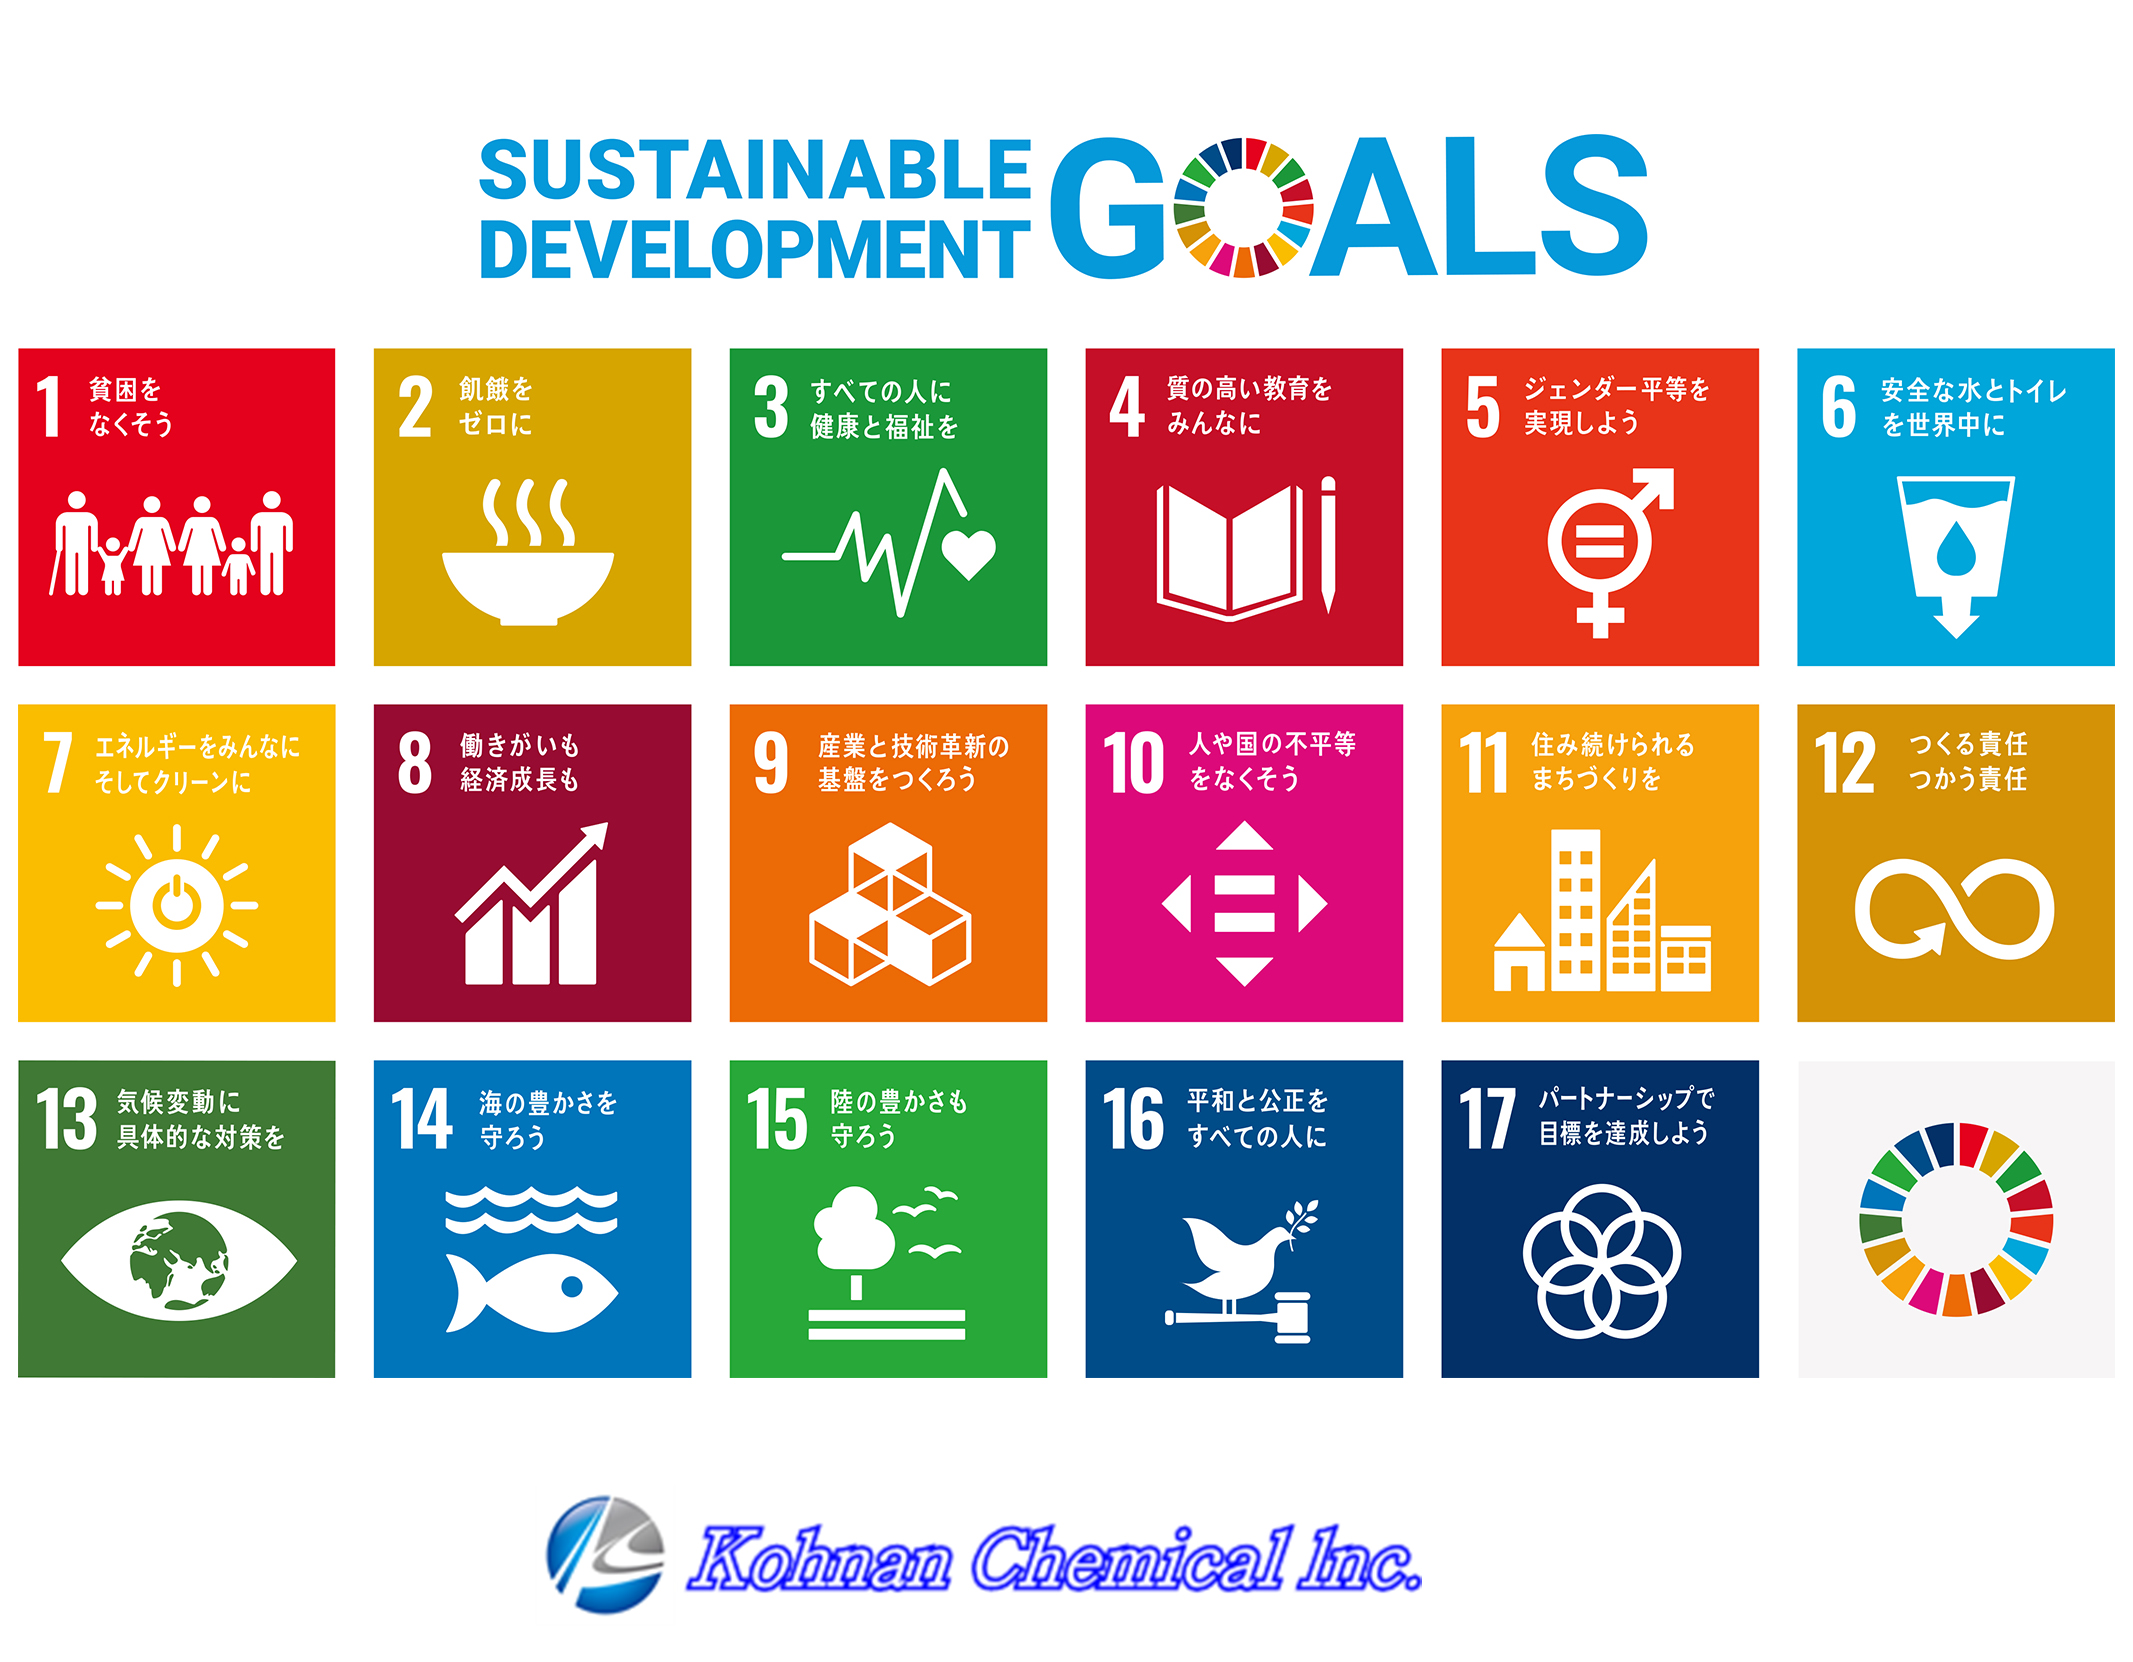 Our Company is working on SDGs